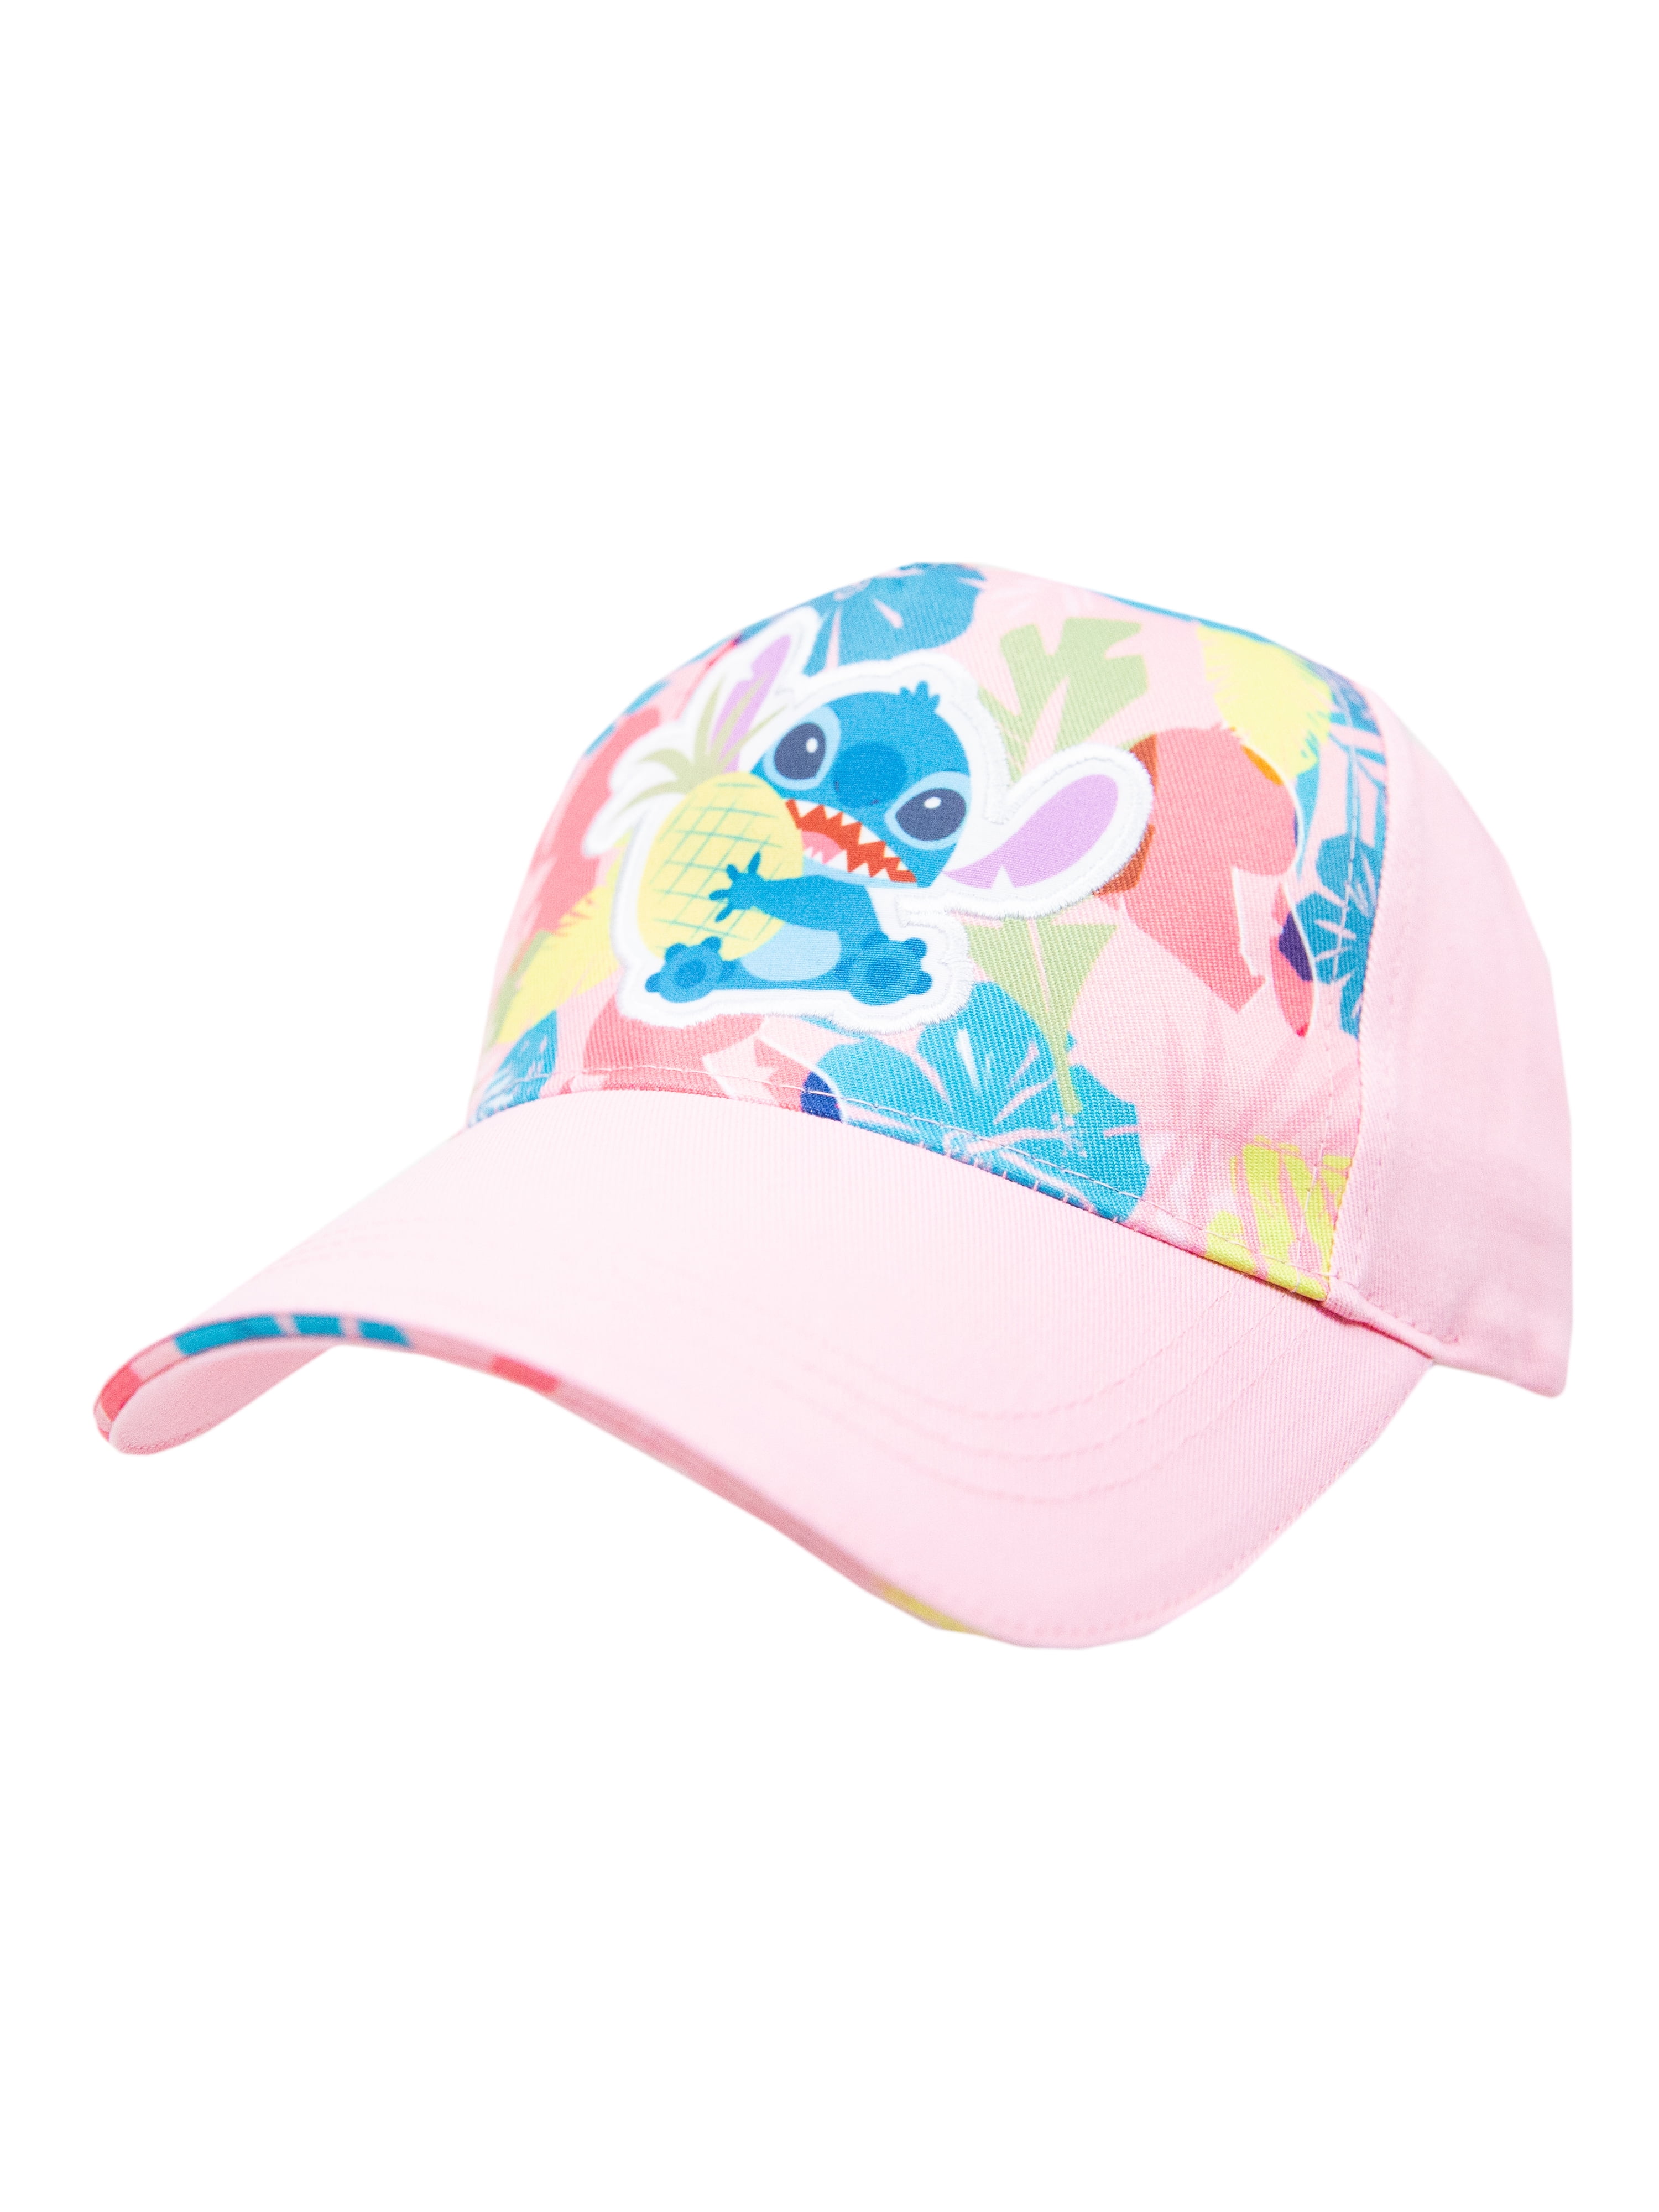 Lilo & Stitch Girls Licensed Baseball Hat Pink with Tropical Pattern